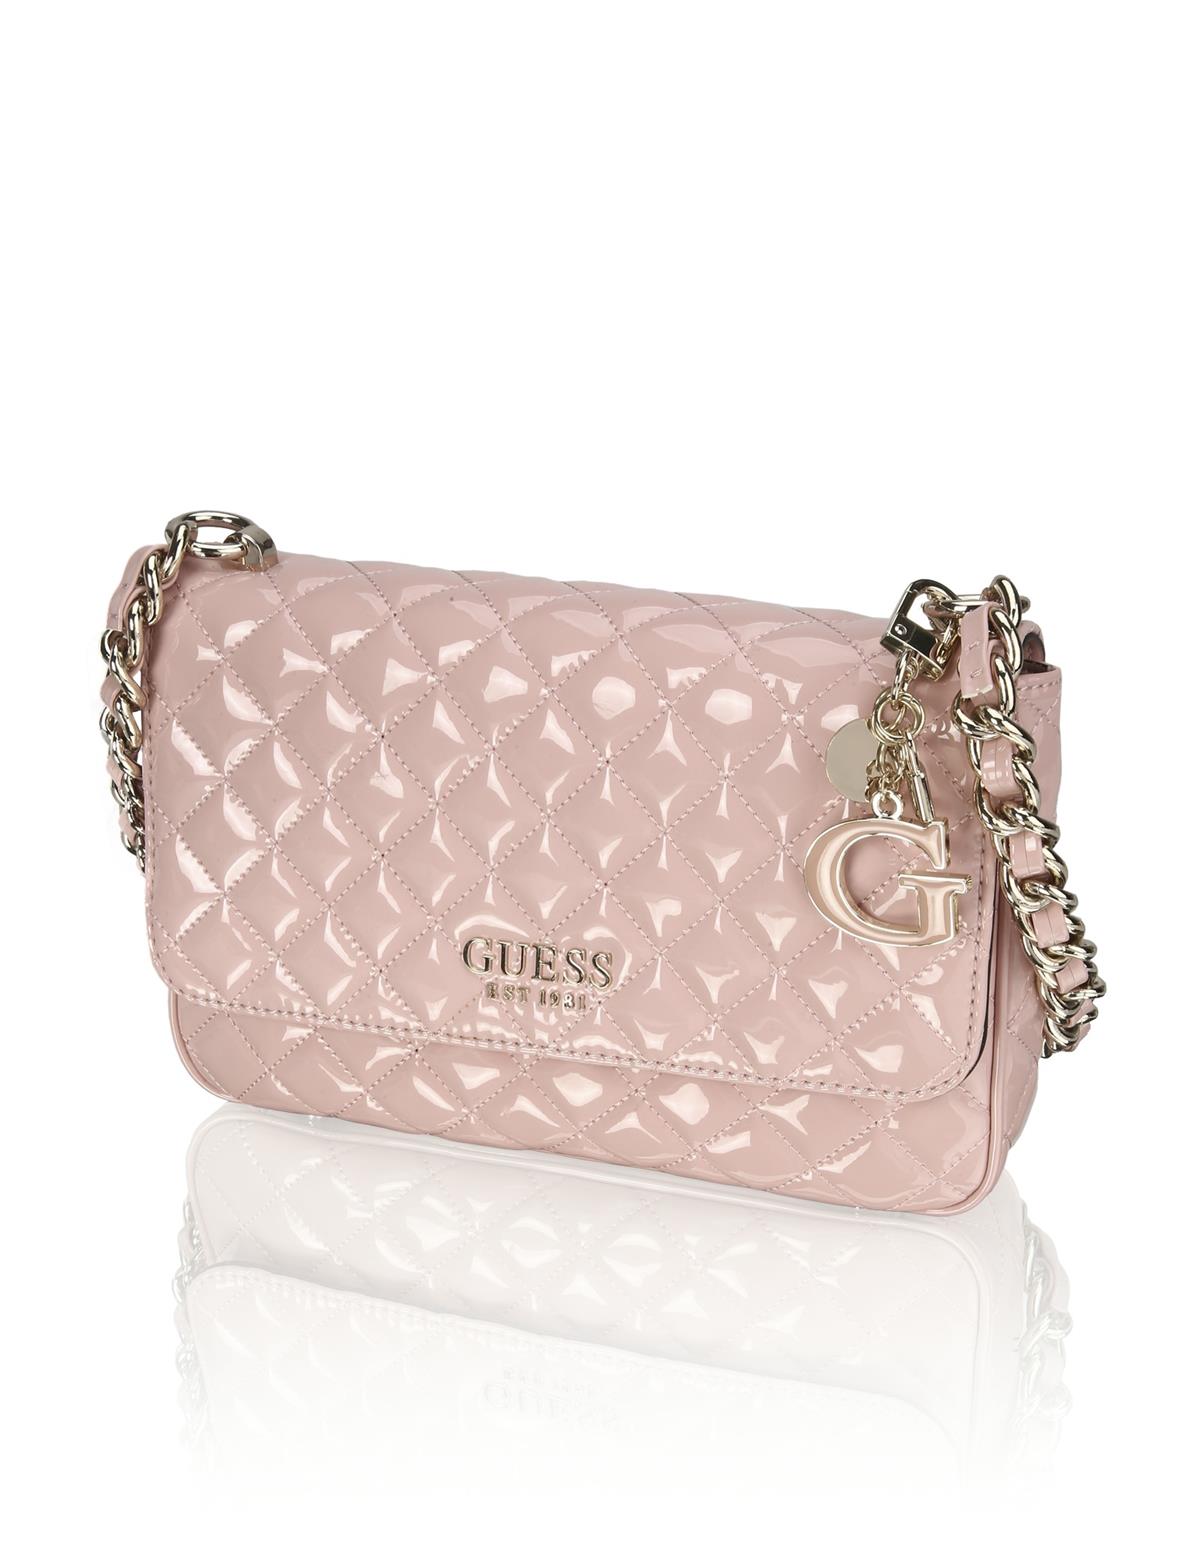 HUMANIC 17 Guess Quilted Bag EUR 130 6131001937